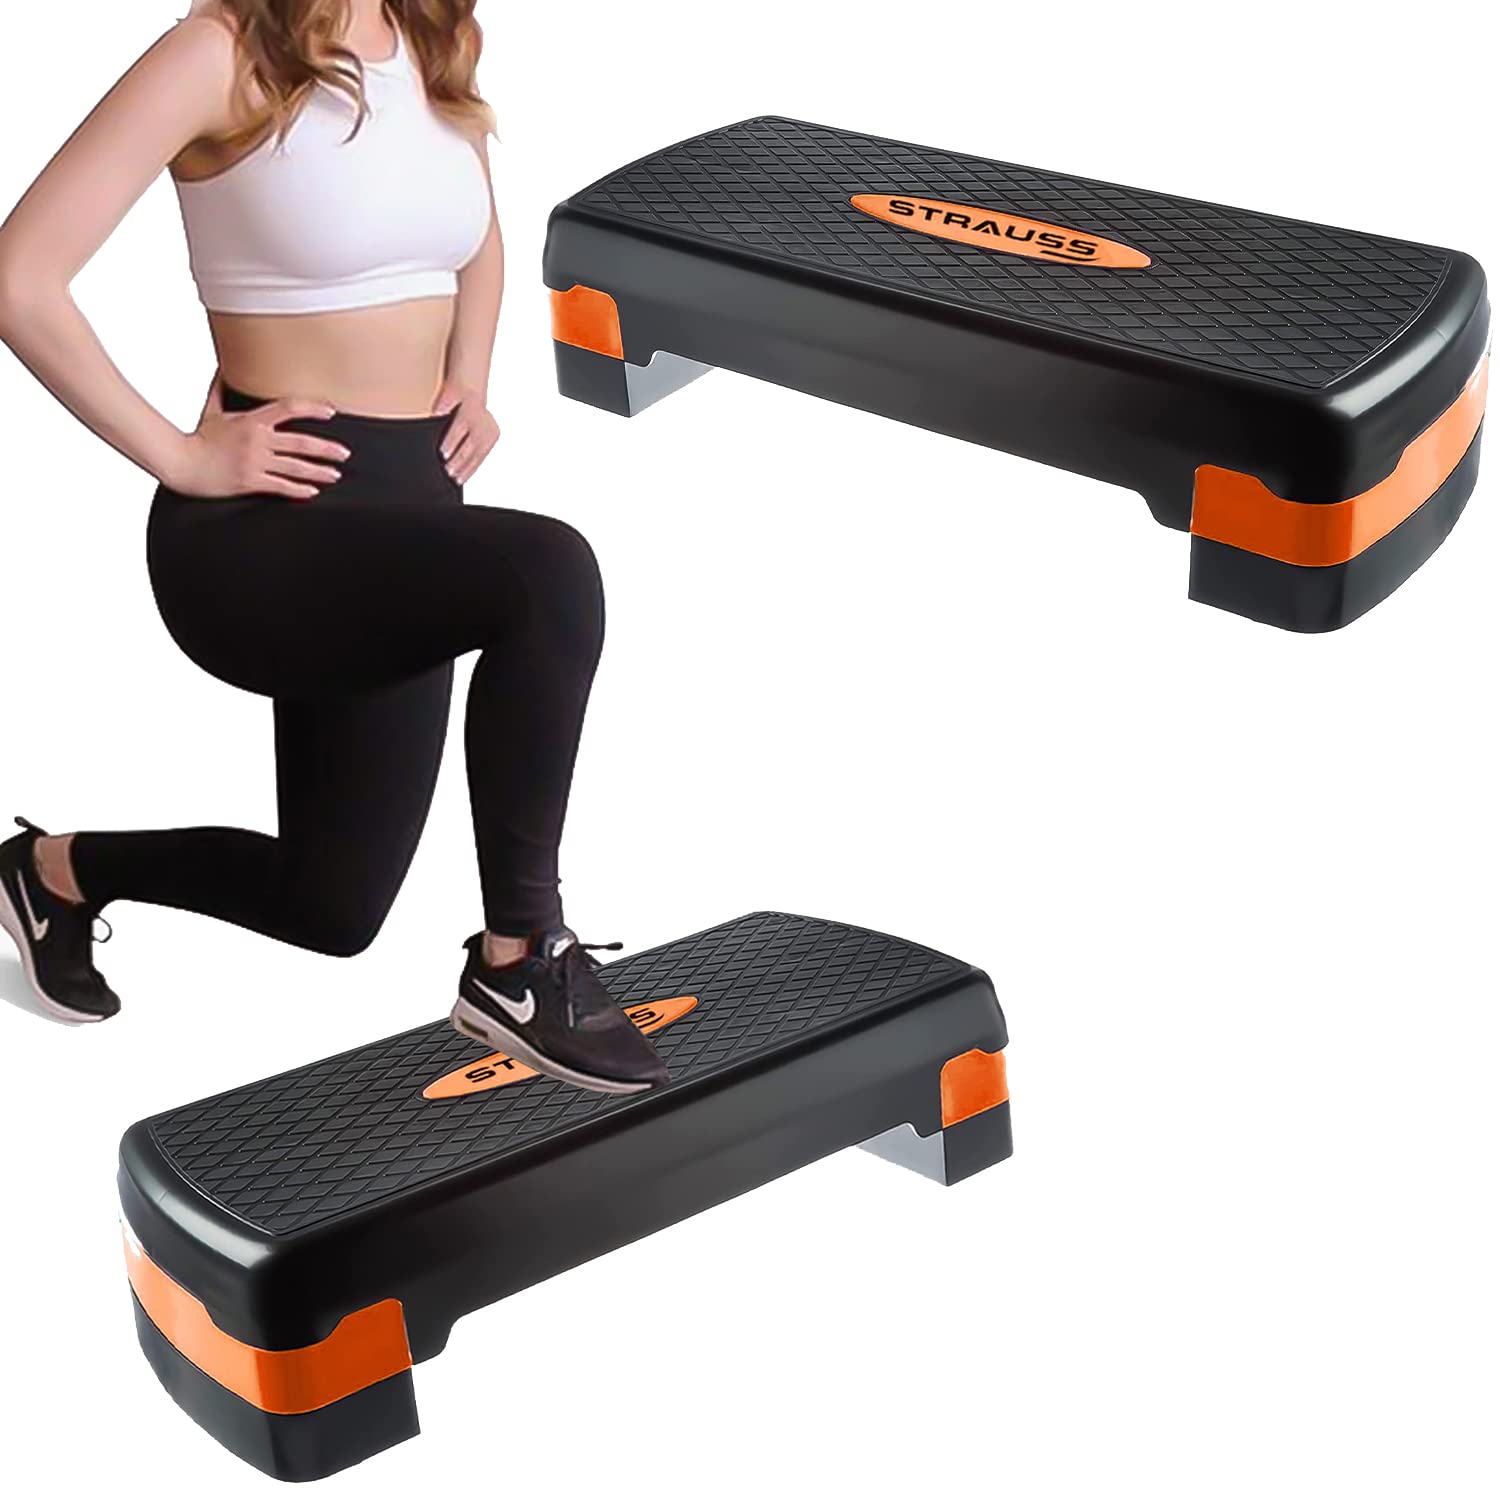 Strauss Aerobic Stepper | Two Height Level Adjustments - 4 inches and 6 inches | Slip-Resistant & Shock Absorbing Platform for Extra-Durability - Supports Upto 200 KG, (Orange)